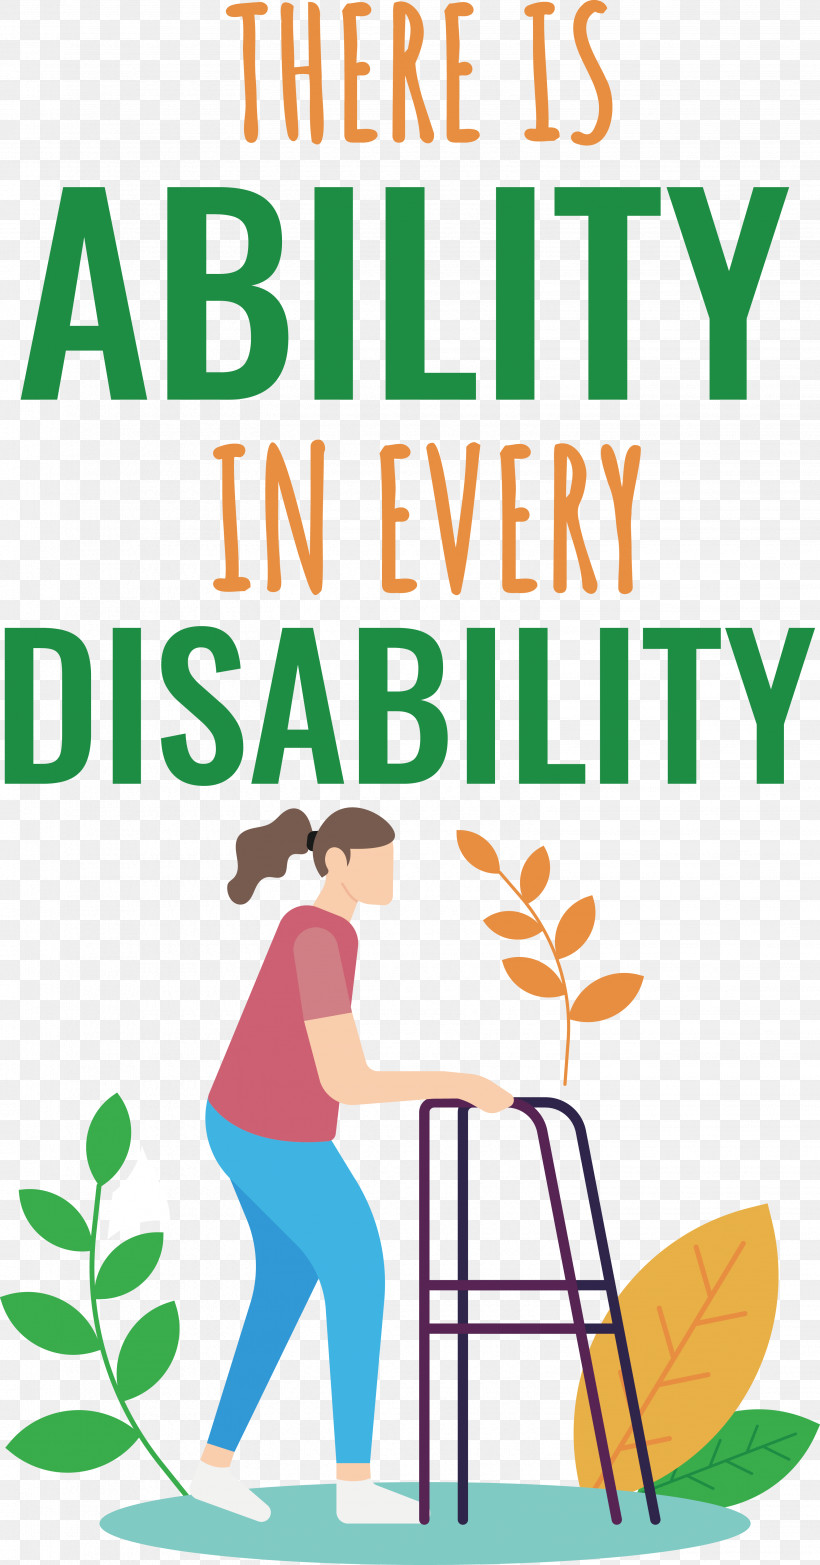 International Disability Day Never Give Up International Day Disabled Persons, PNG, 3091x5900px, International Disability Day, Disabled Persons, International Day, Never Give Up Download Free